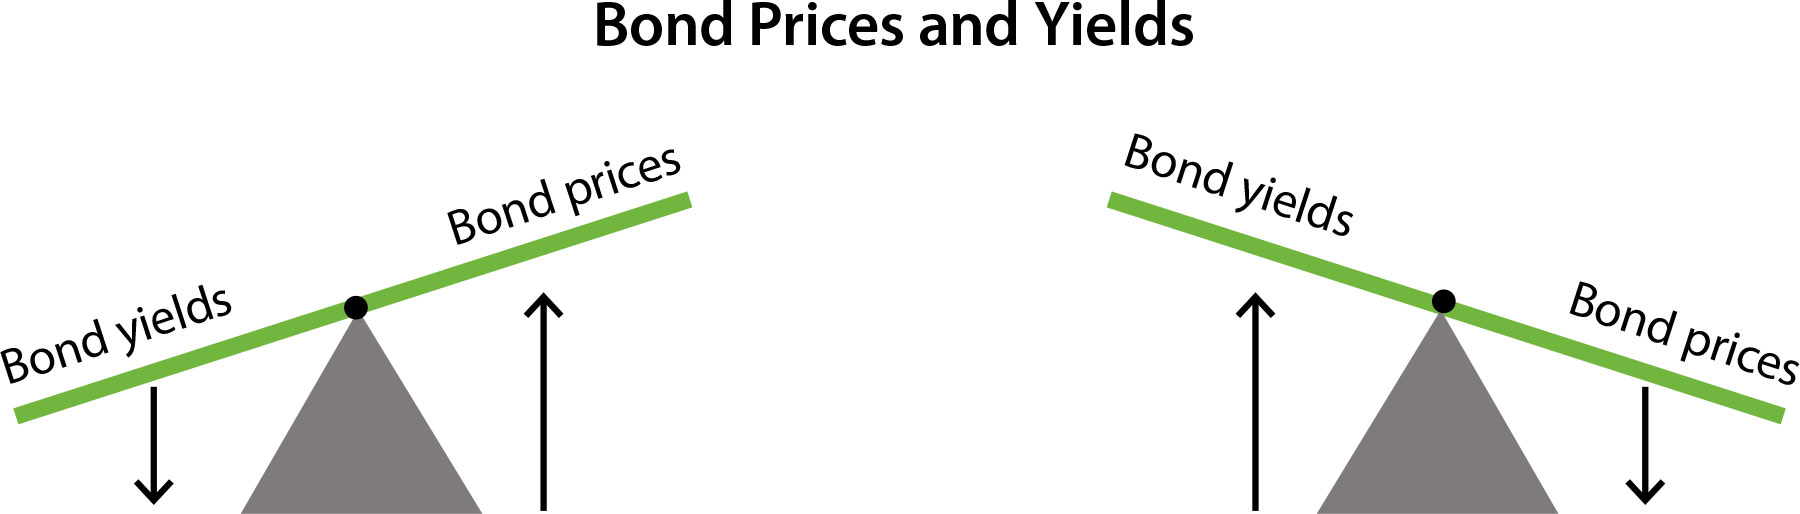 Image showing how bond prices and yields move in opposite directions.